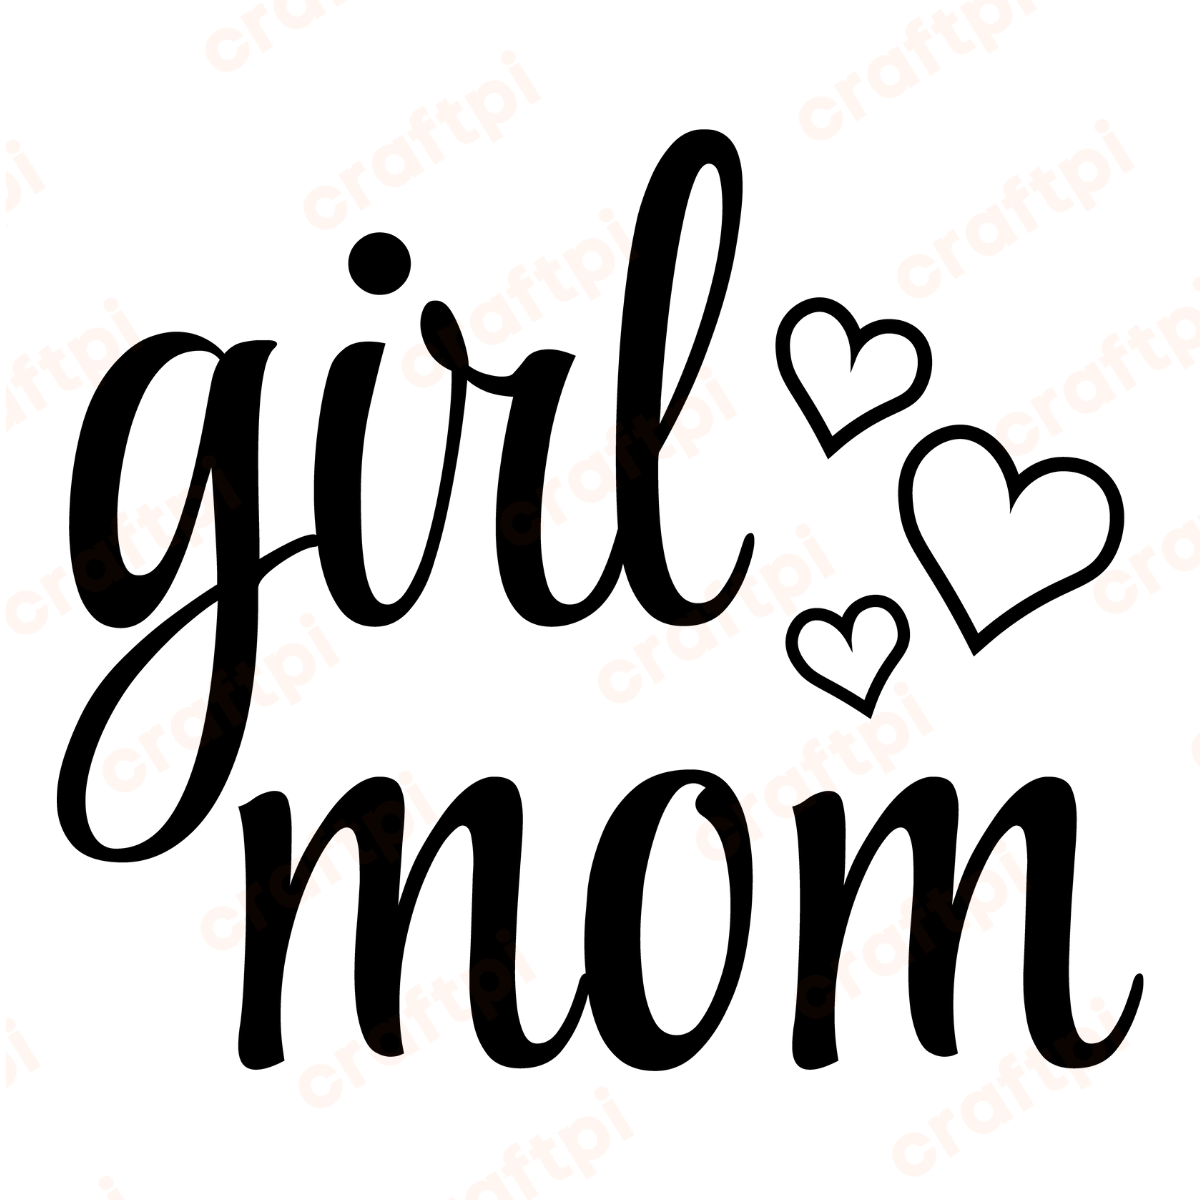 girl mom with hearts